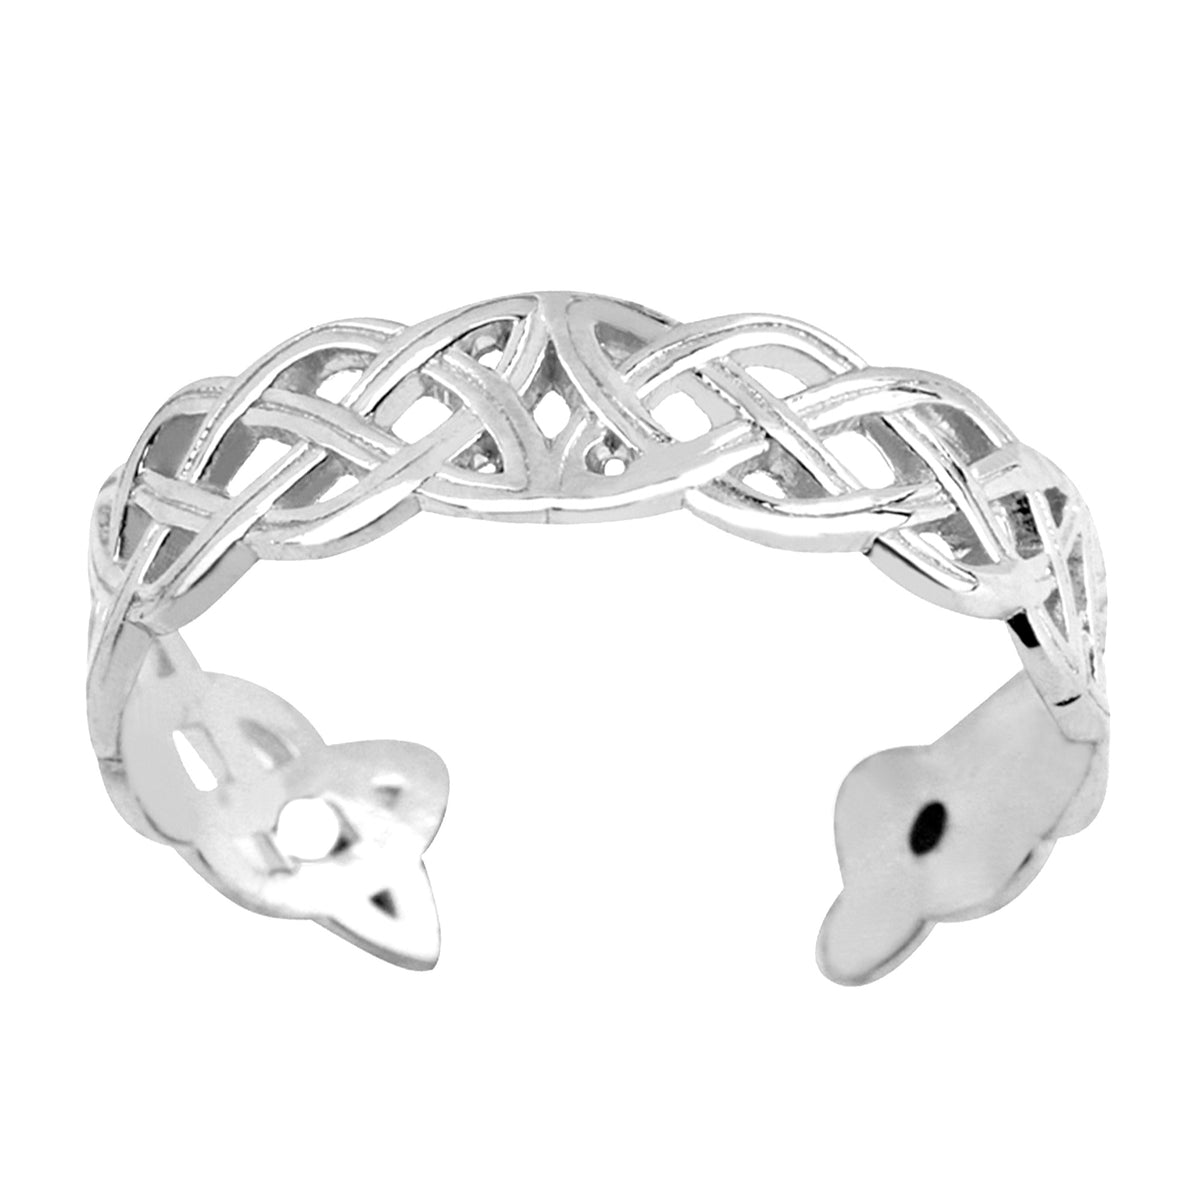 14K White Gold Celtic Knot Weave Design Cuff Style Adjustable Toe Ring fine designer jewelry for men and women